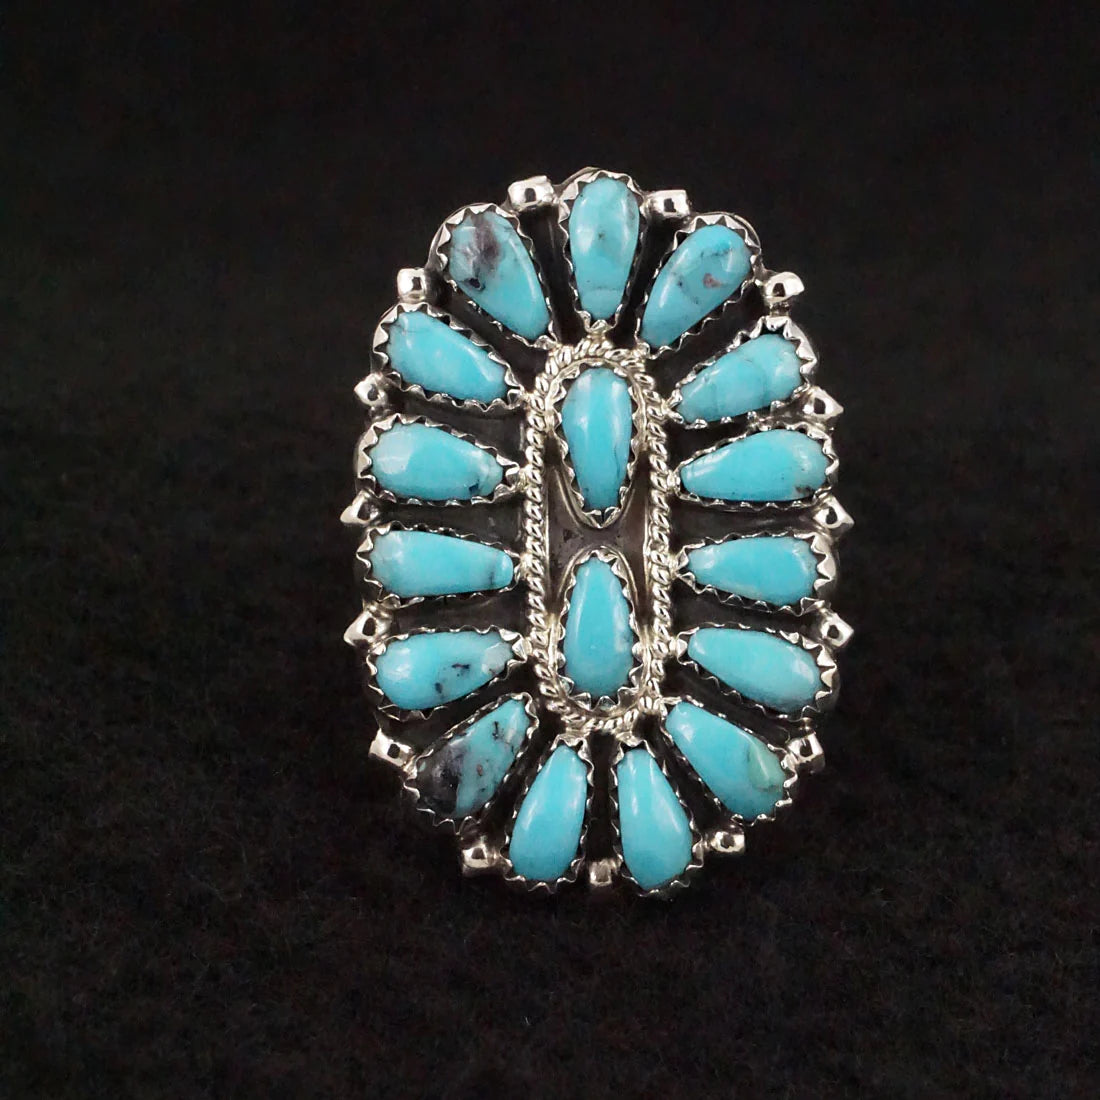 Turquoise & Sterling Silver Ring